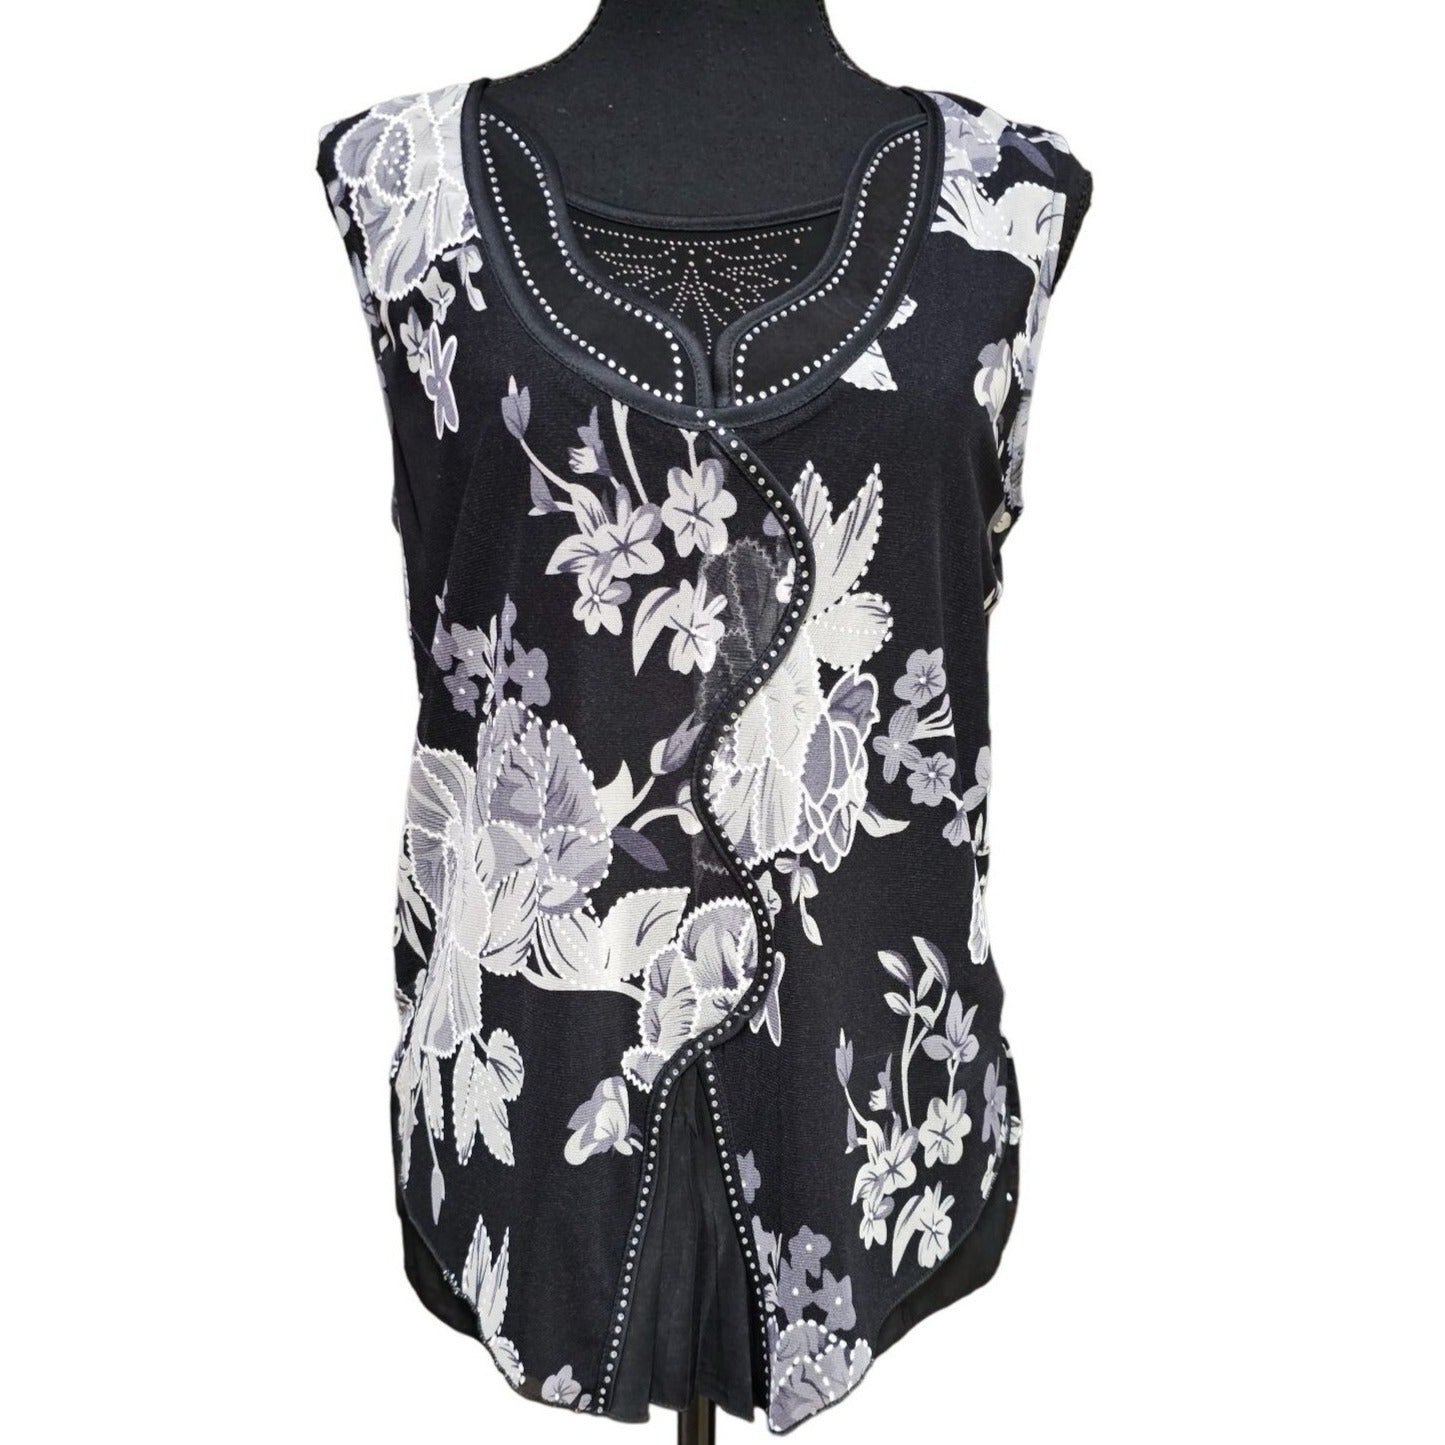 Appointments Semi-Sheer Black and White Formal, Sleeveless Blouse, Size M